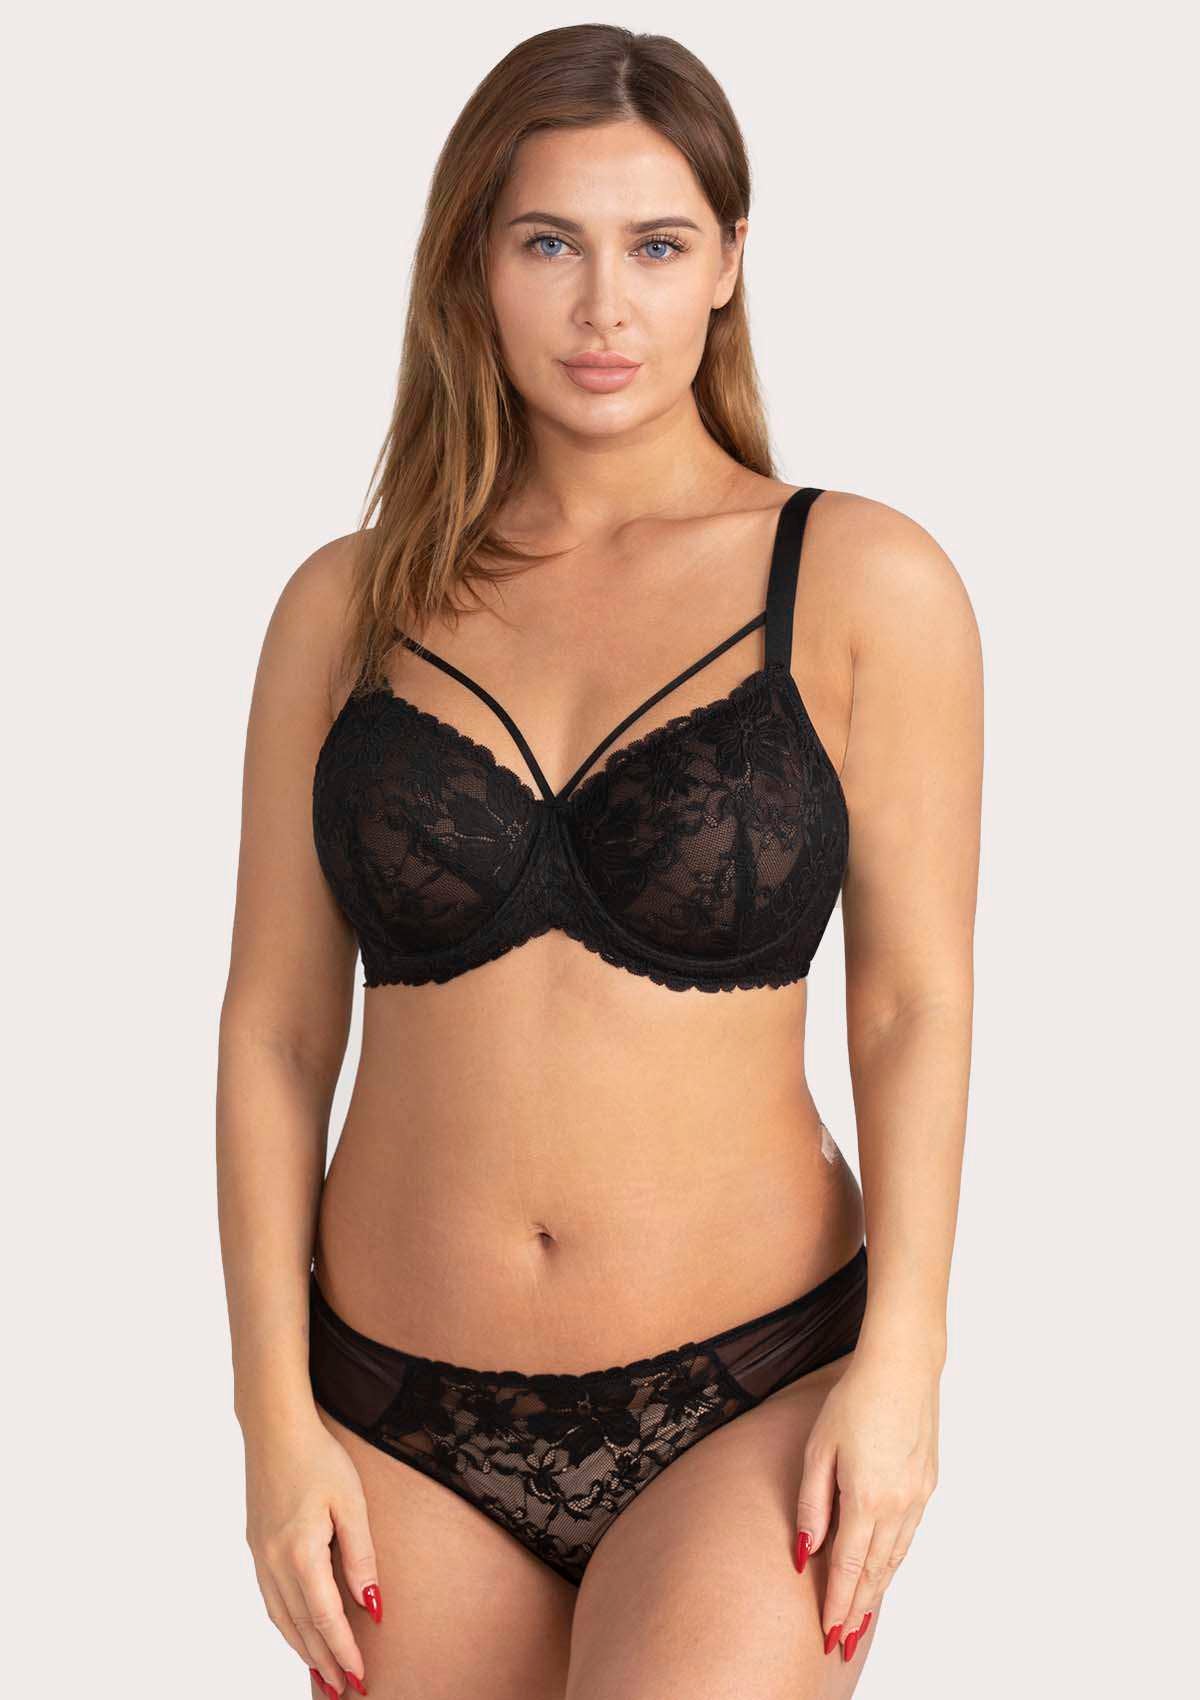 HSIA Pretty In Petals Lace Bra And Panty Set: Non Padded Wired Bra - Black / 38 / D